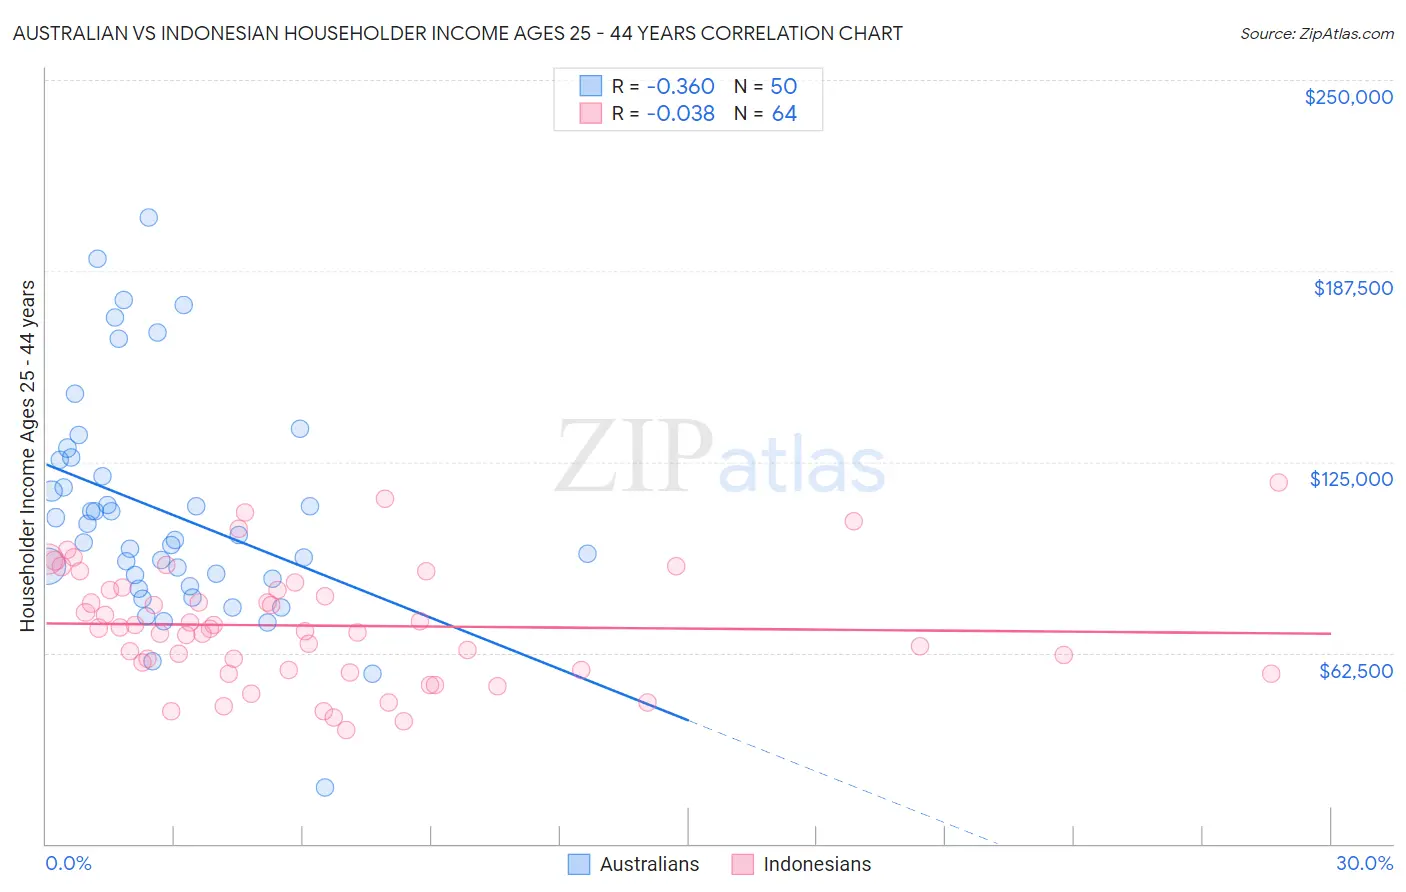 Australian vs Indonesian Householder Income Ages 25 - 44 years